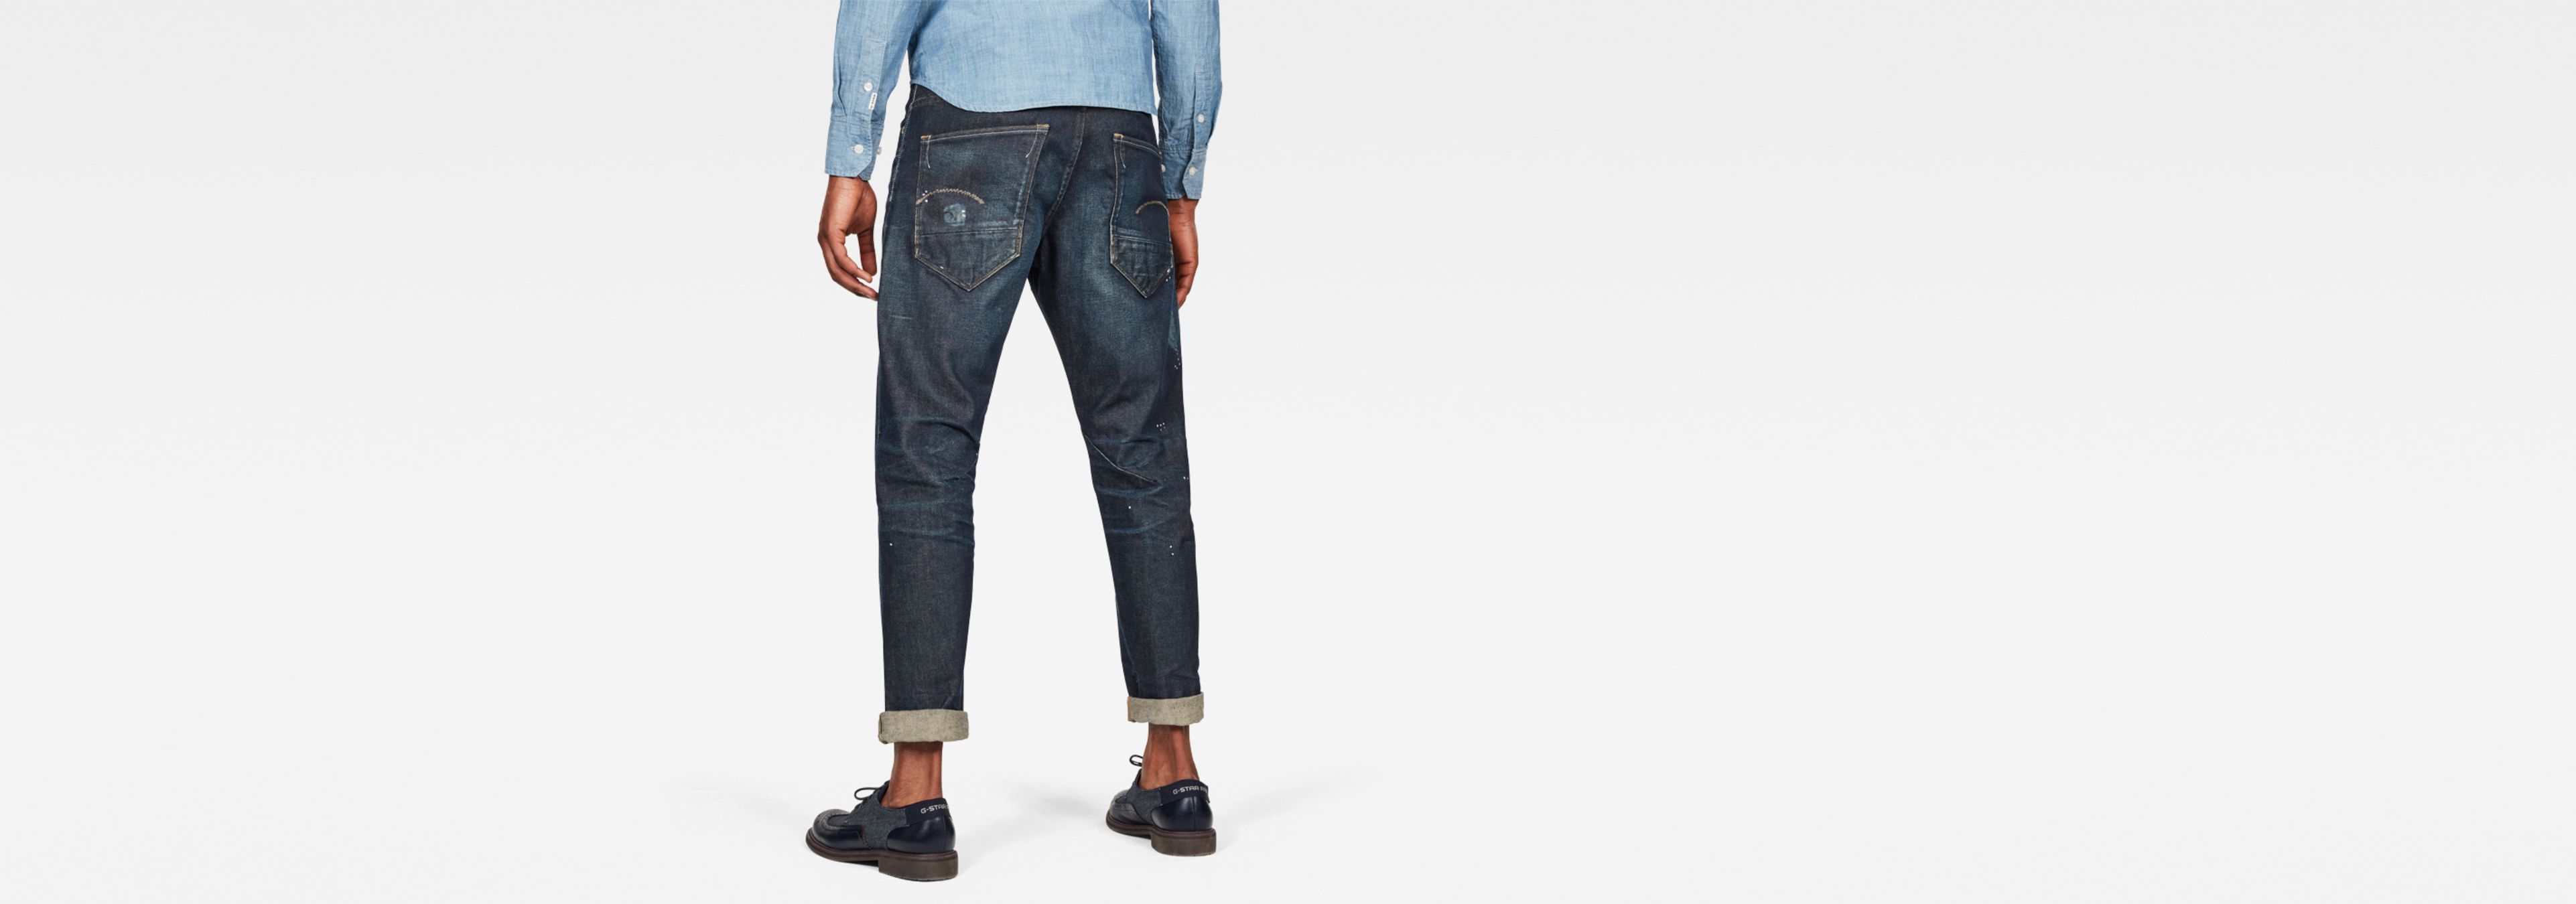 Morry 3D Relaxed Tapered Selvedge Jeans | Dark blue | G-Star RAW® ZA